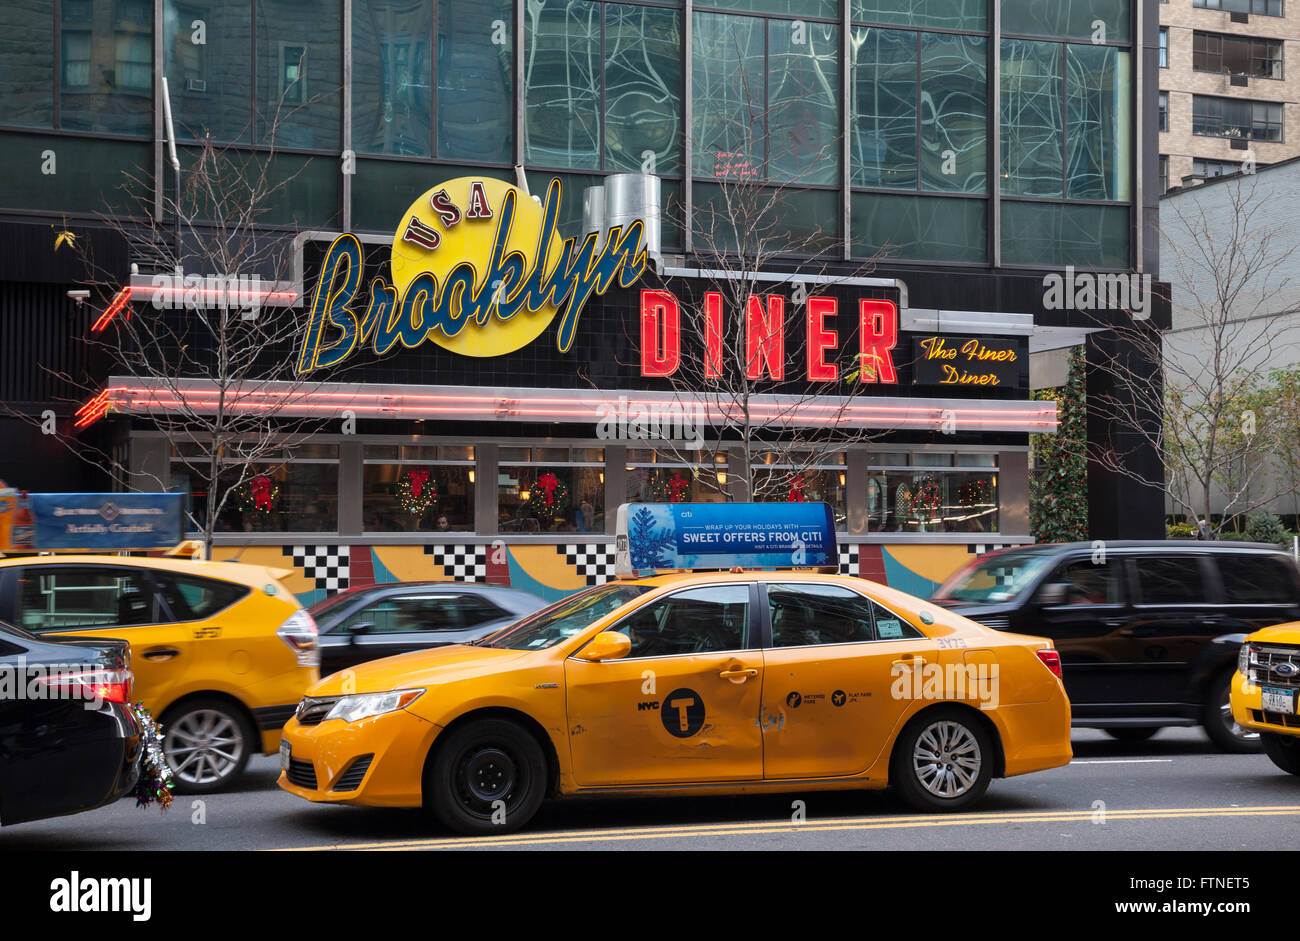 USA Brooklyn Diner and traditional yellow cab, New York City, USA, United States of America Stock Photo